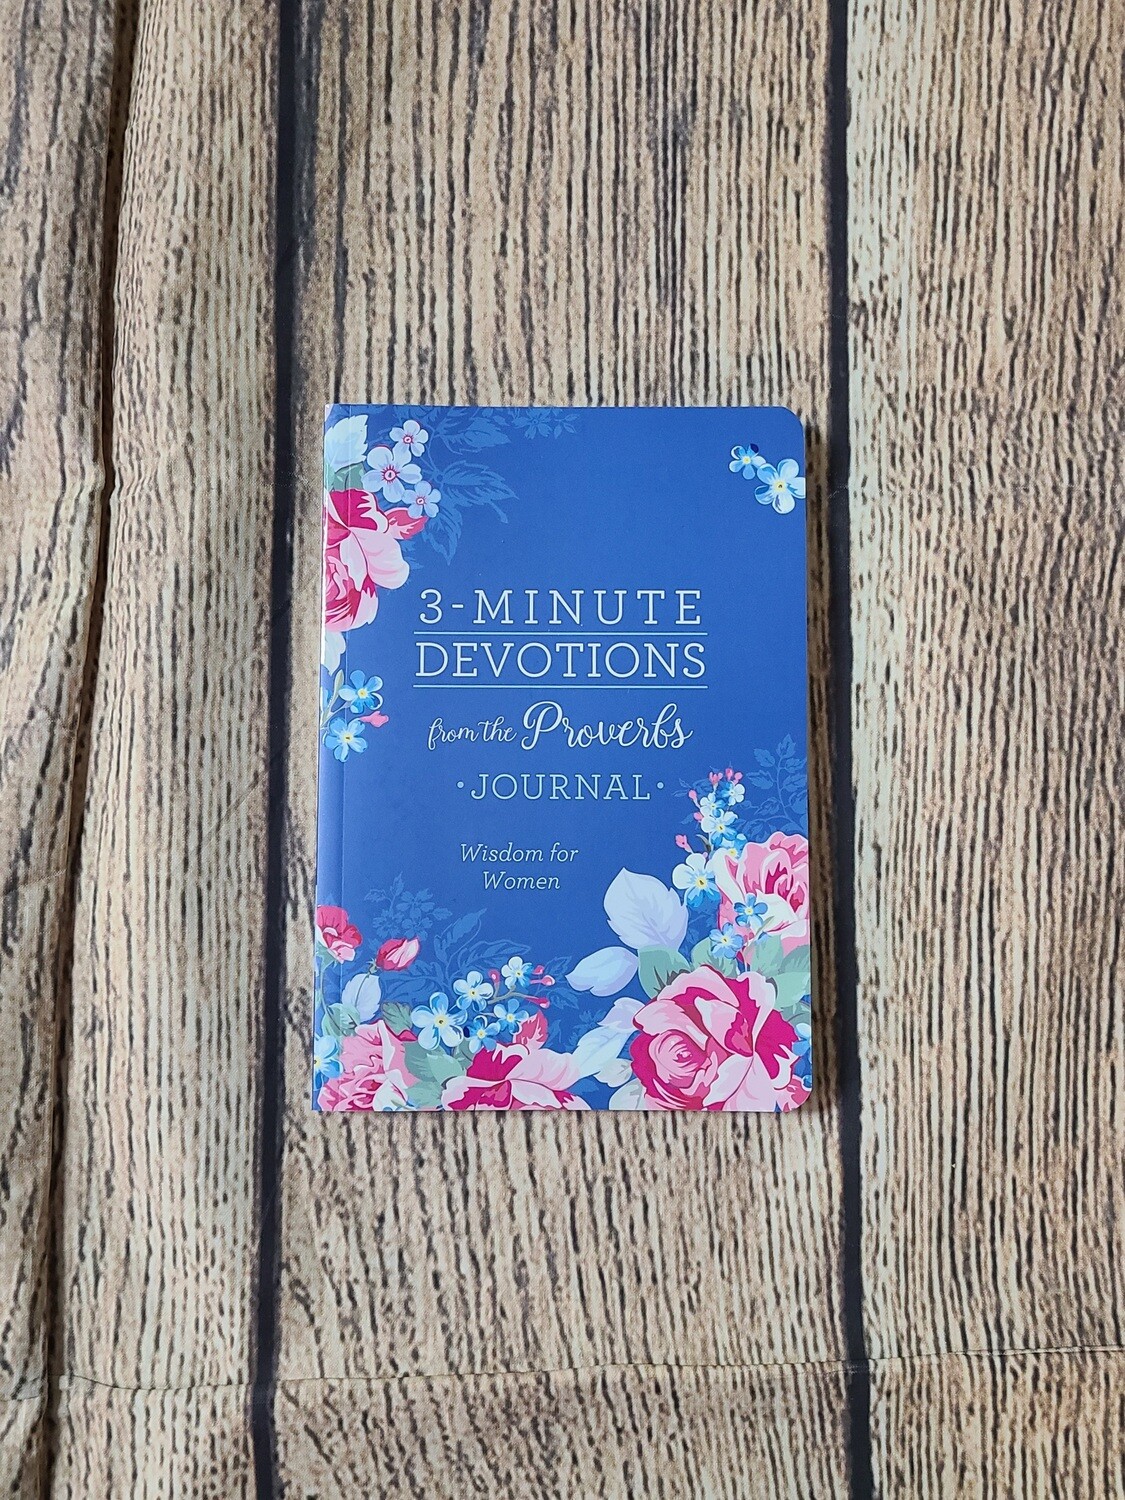 3-Minute Devotions from the Proverbs Journal: Wisdom for Women by Joan C. Webb and MariLee Parrish